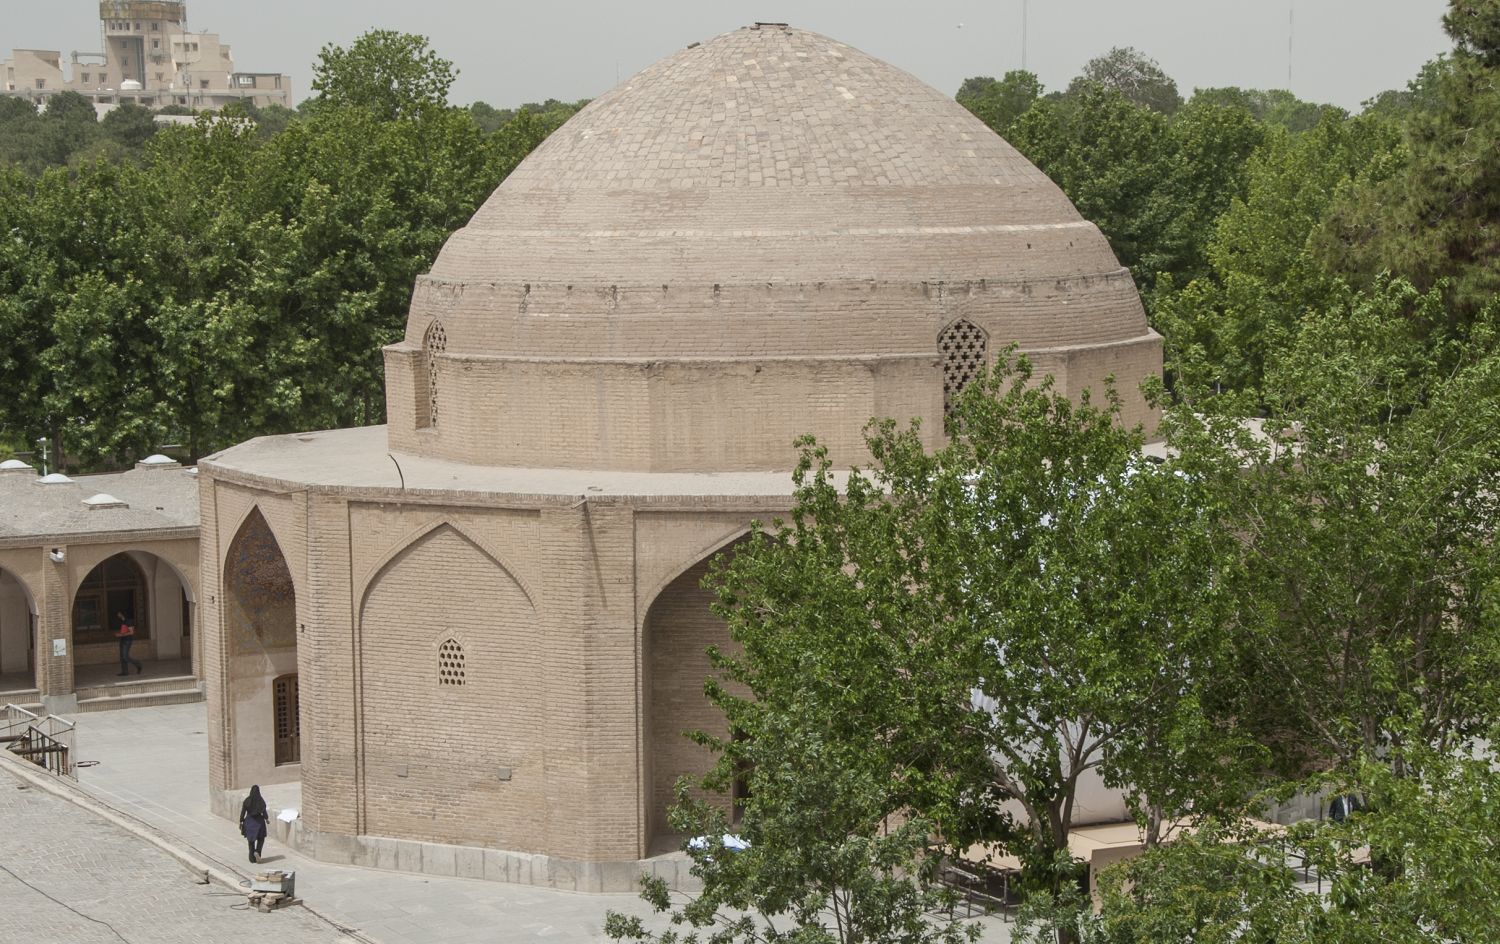 View of domed tawhid-khanah structure from Ali Qapu tower.